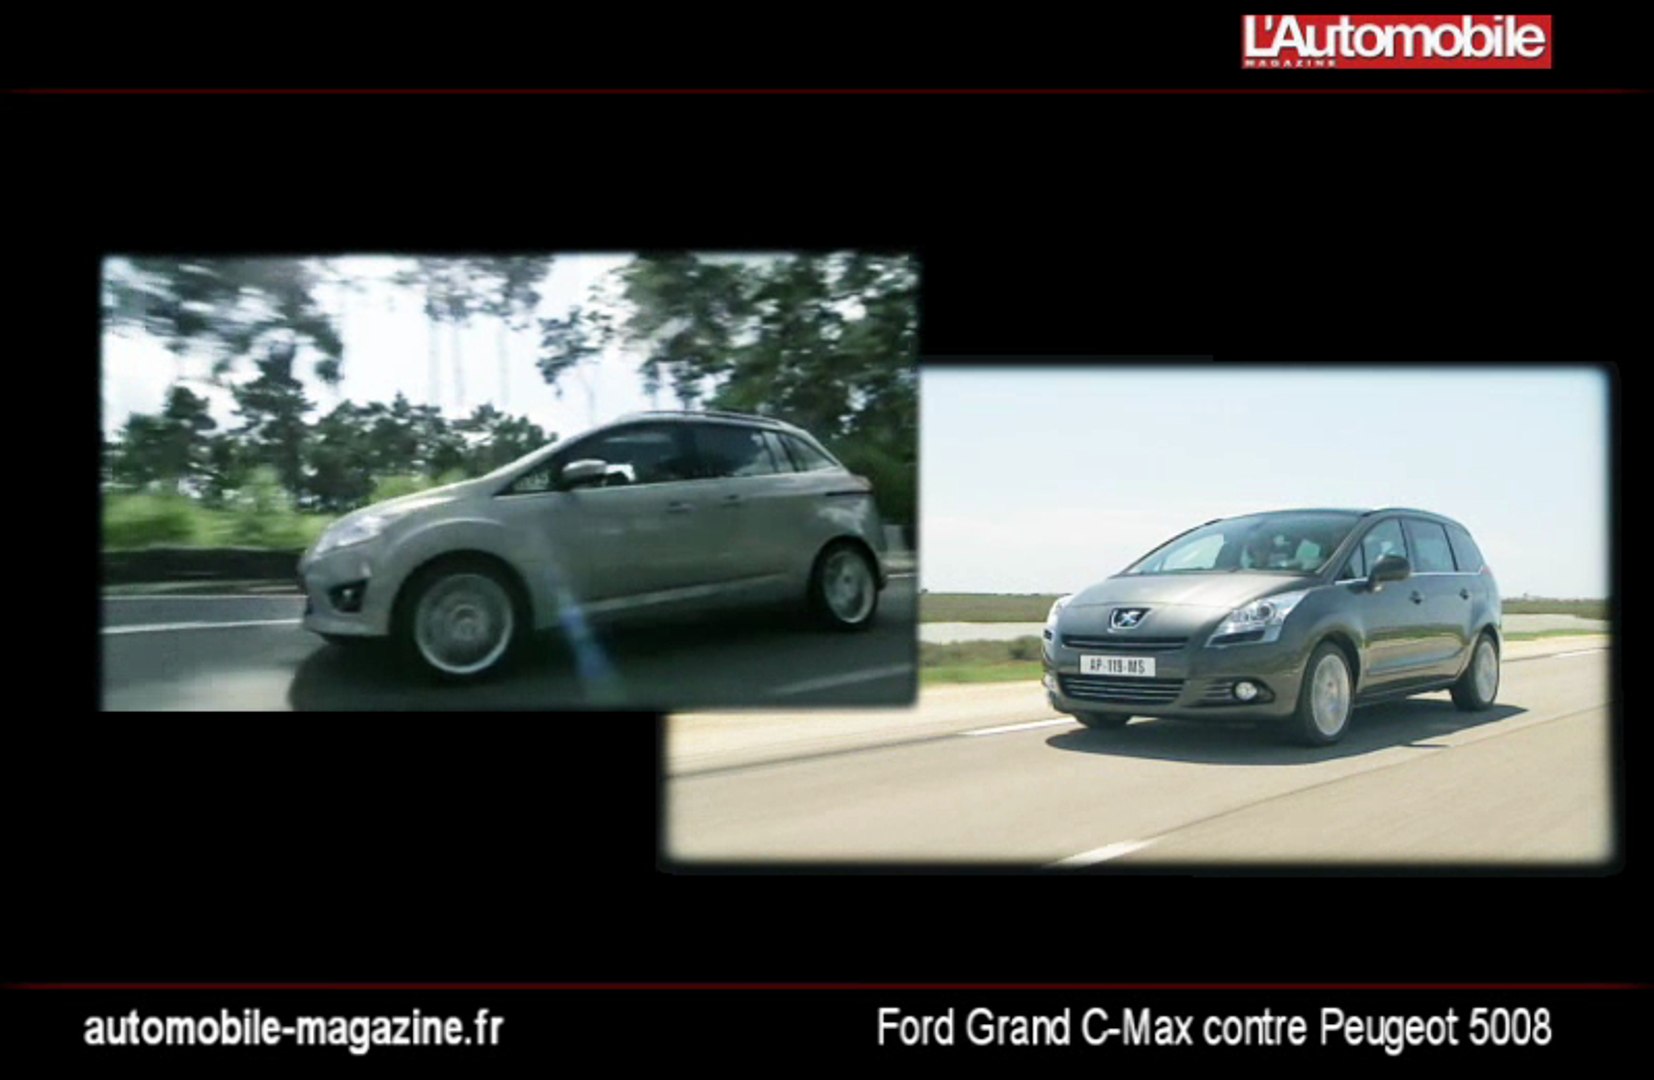 Ford Grand C-Max contre Peugeot 5008 - Vidéo Dailymotion